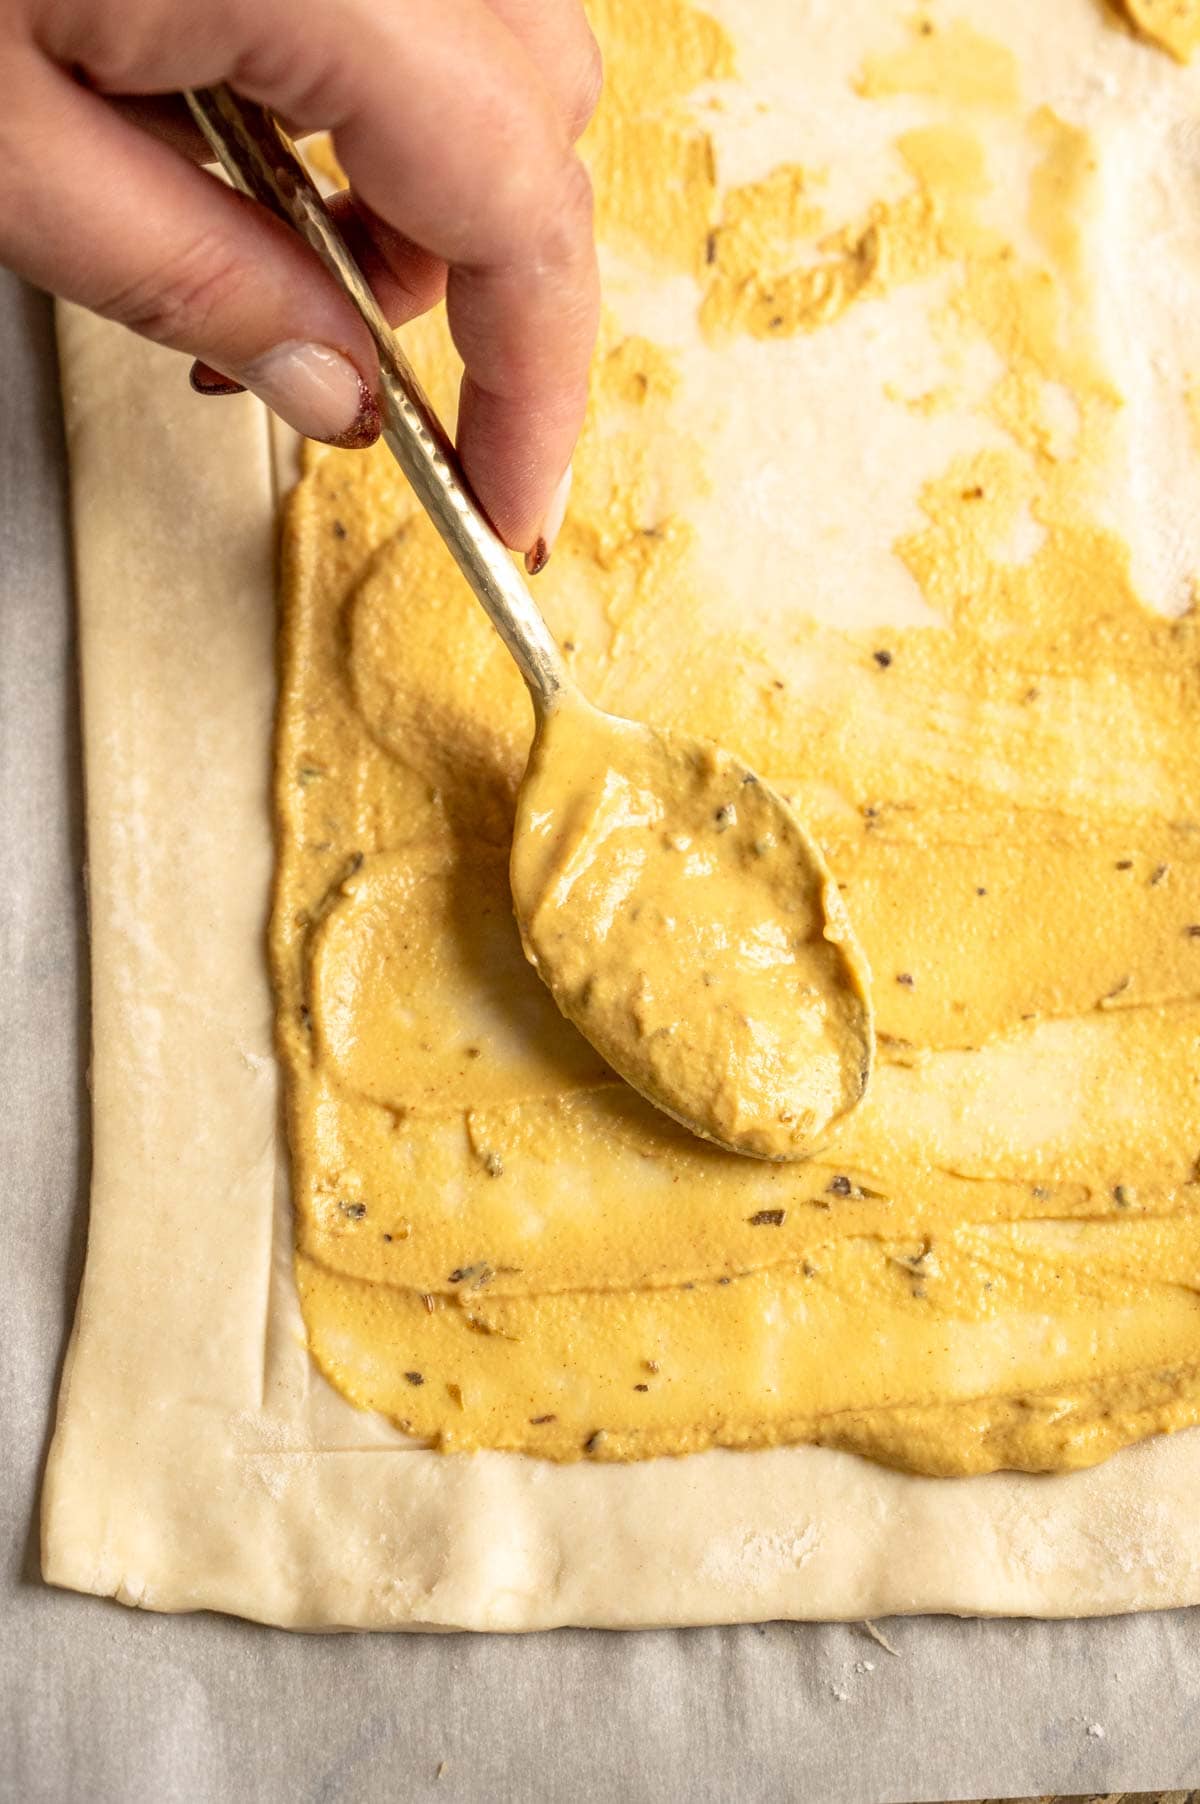 A spoon is spreading the mustard over the puff pastry.